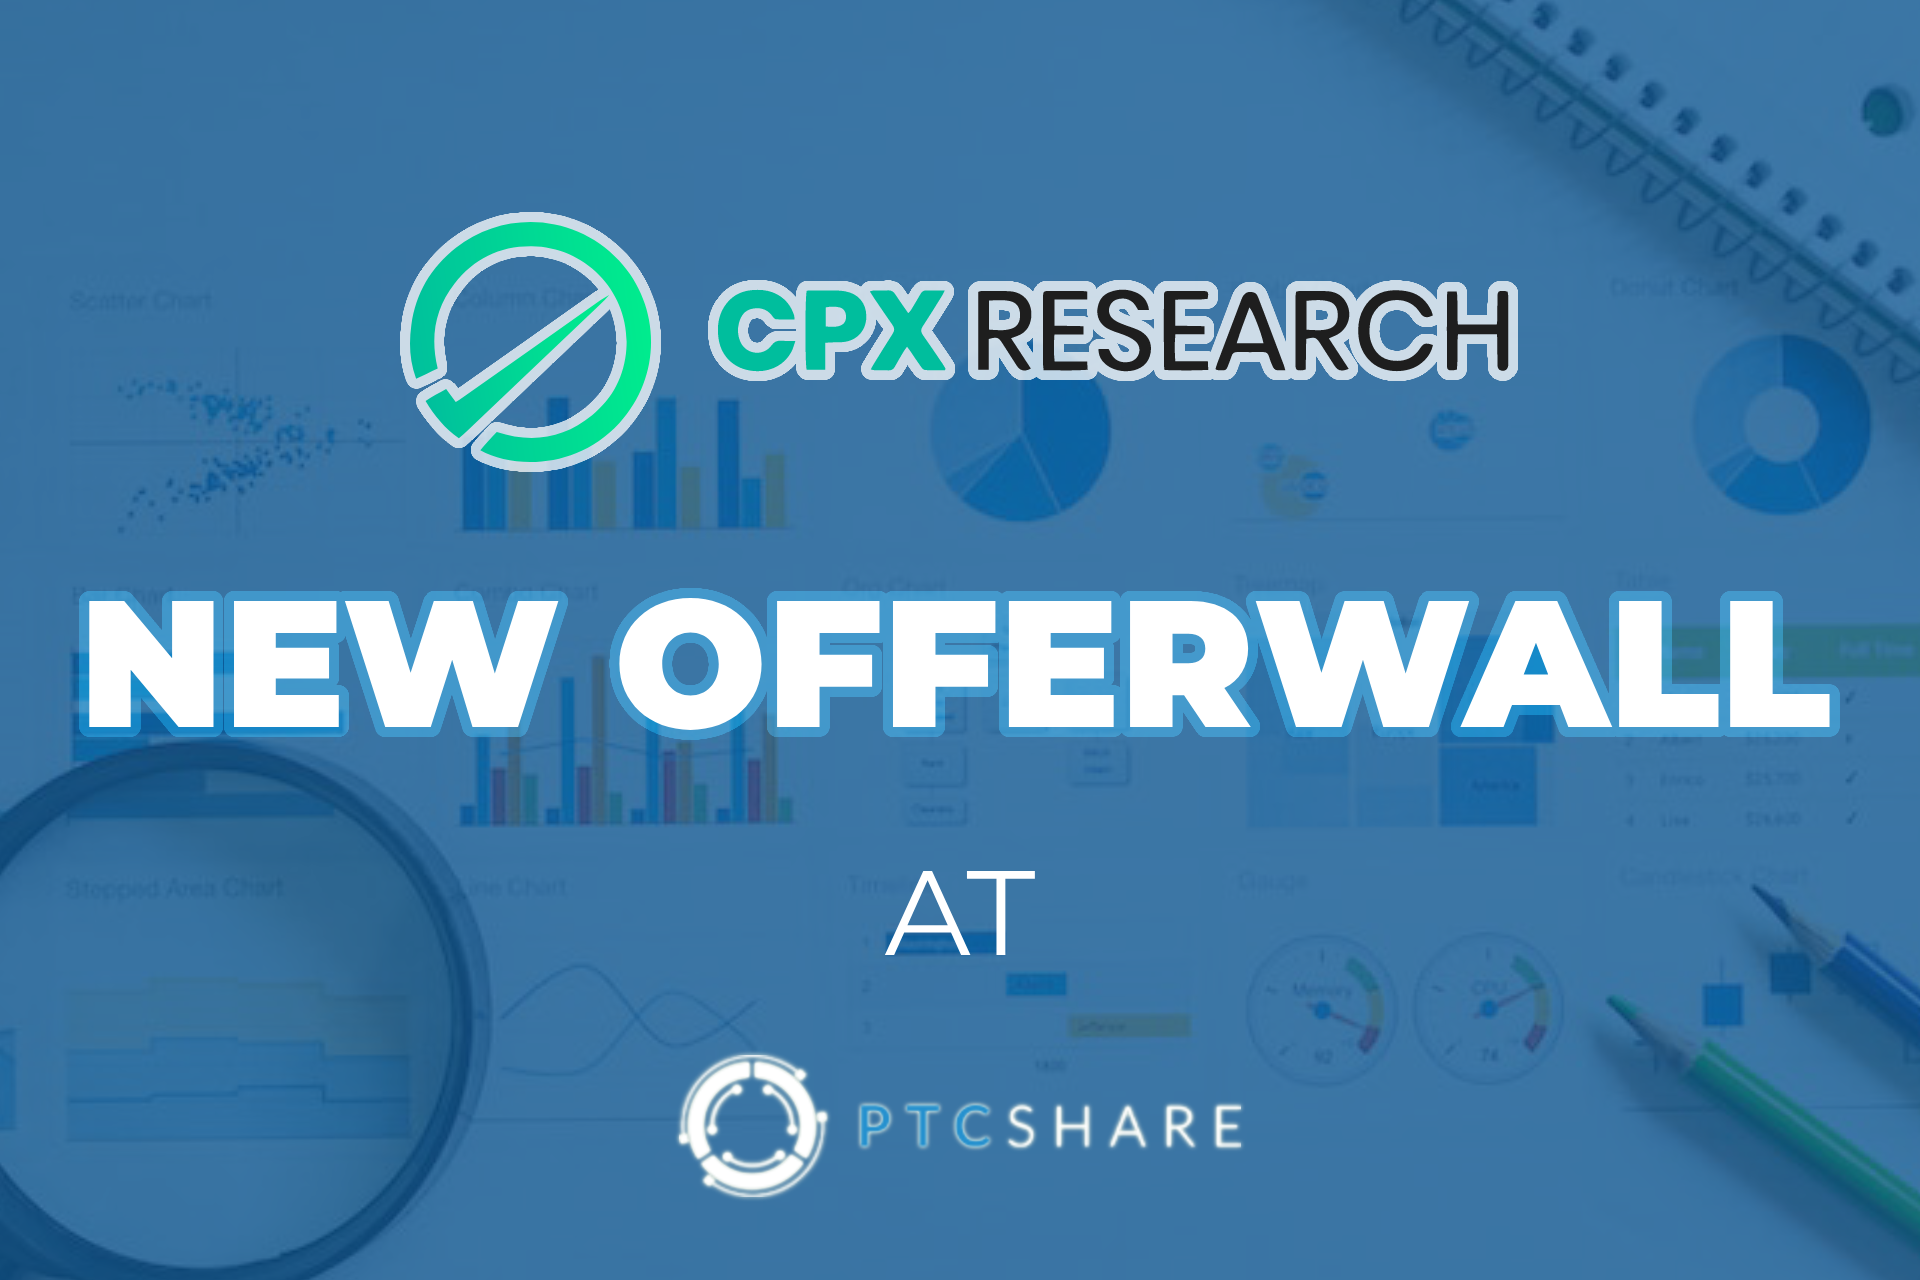 PTCShare Expands Earning Opportunities with the Addition of CPX Research Offerwall